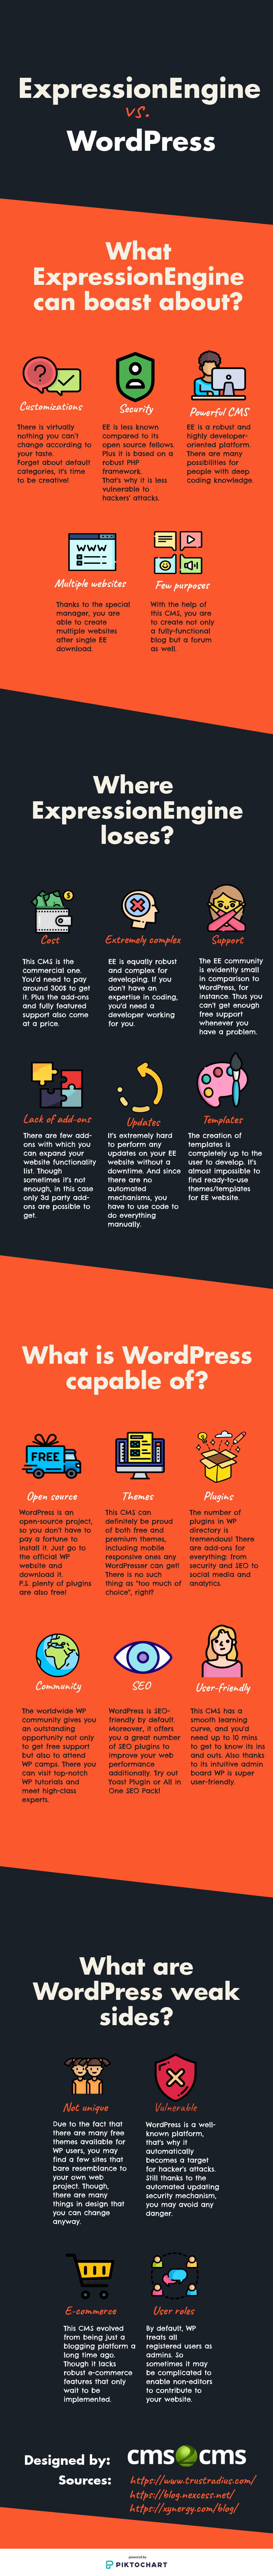 expression-engine-vs-word-press-pros-and-cons